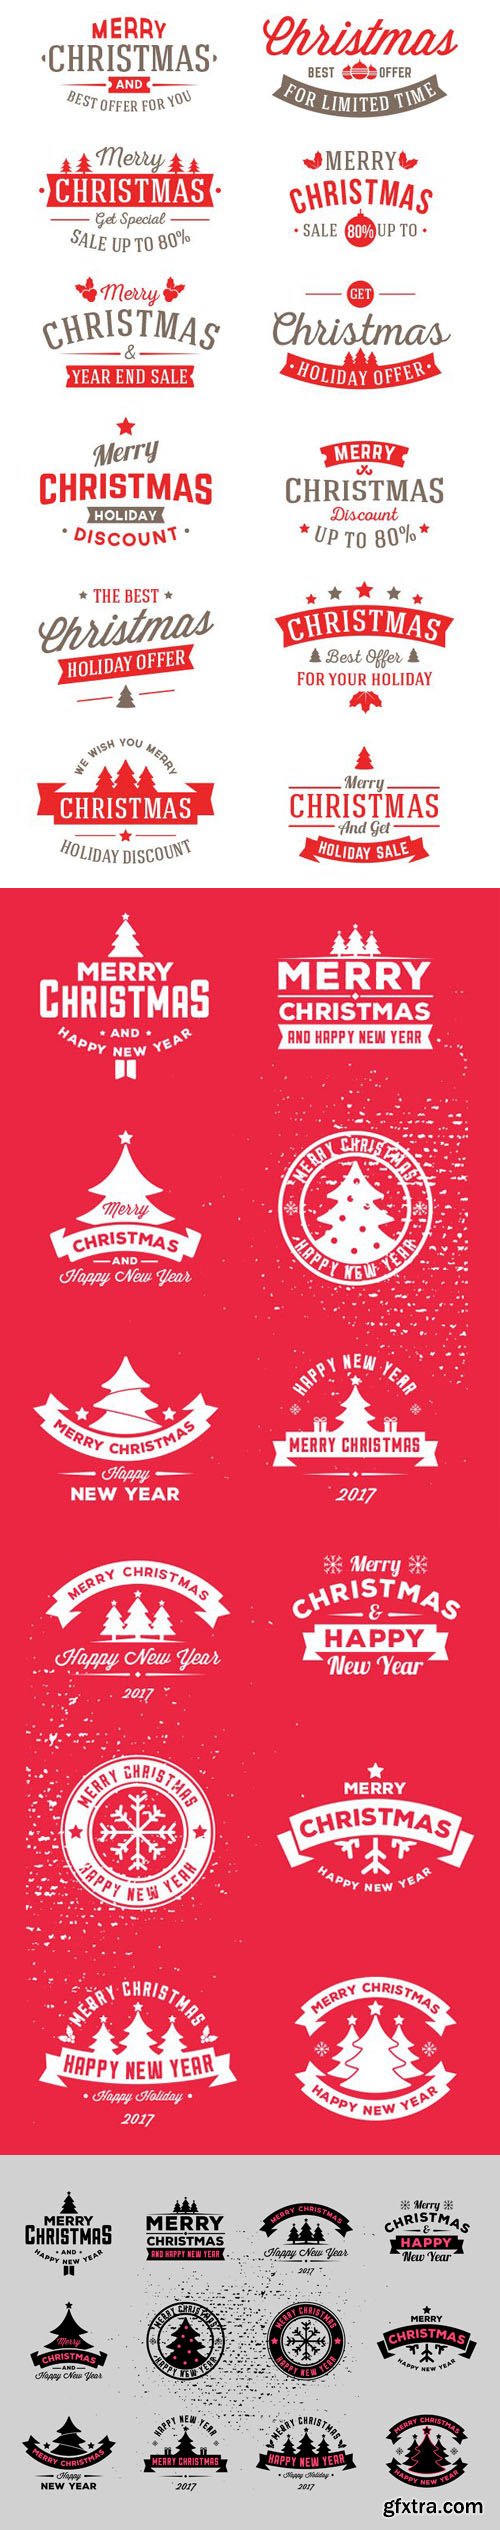 Typographic Christmas Offer & Discount Badges Vector